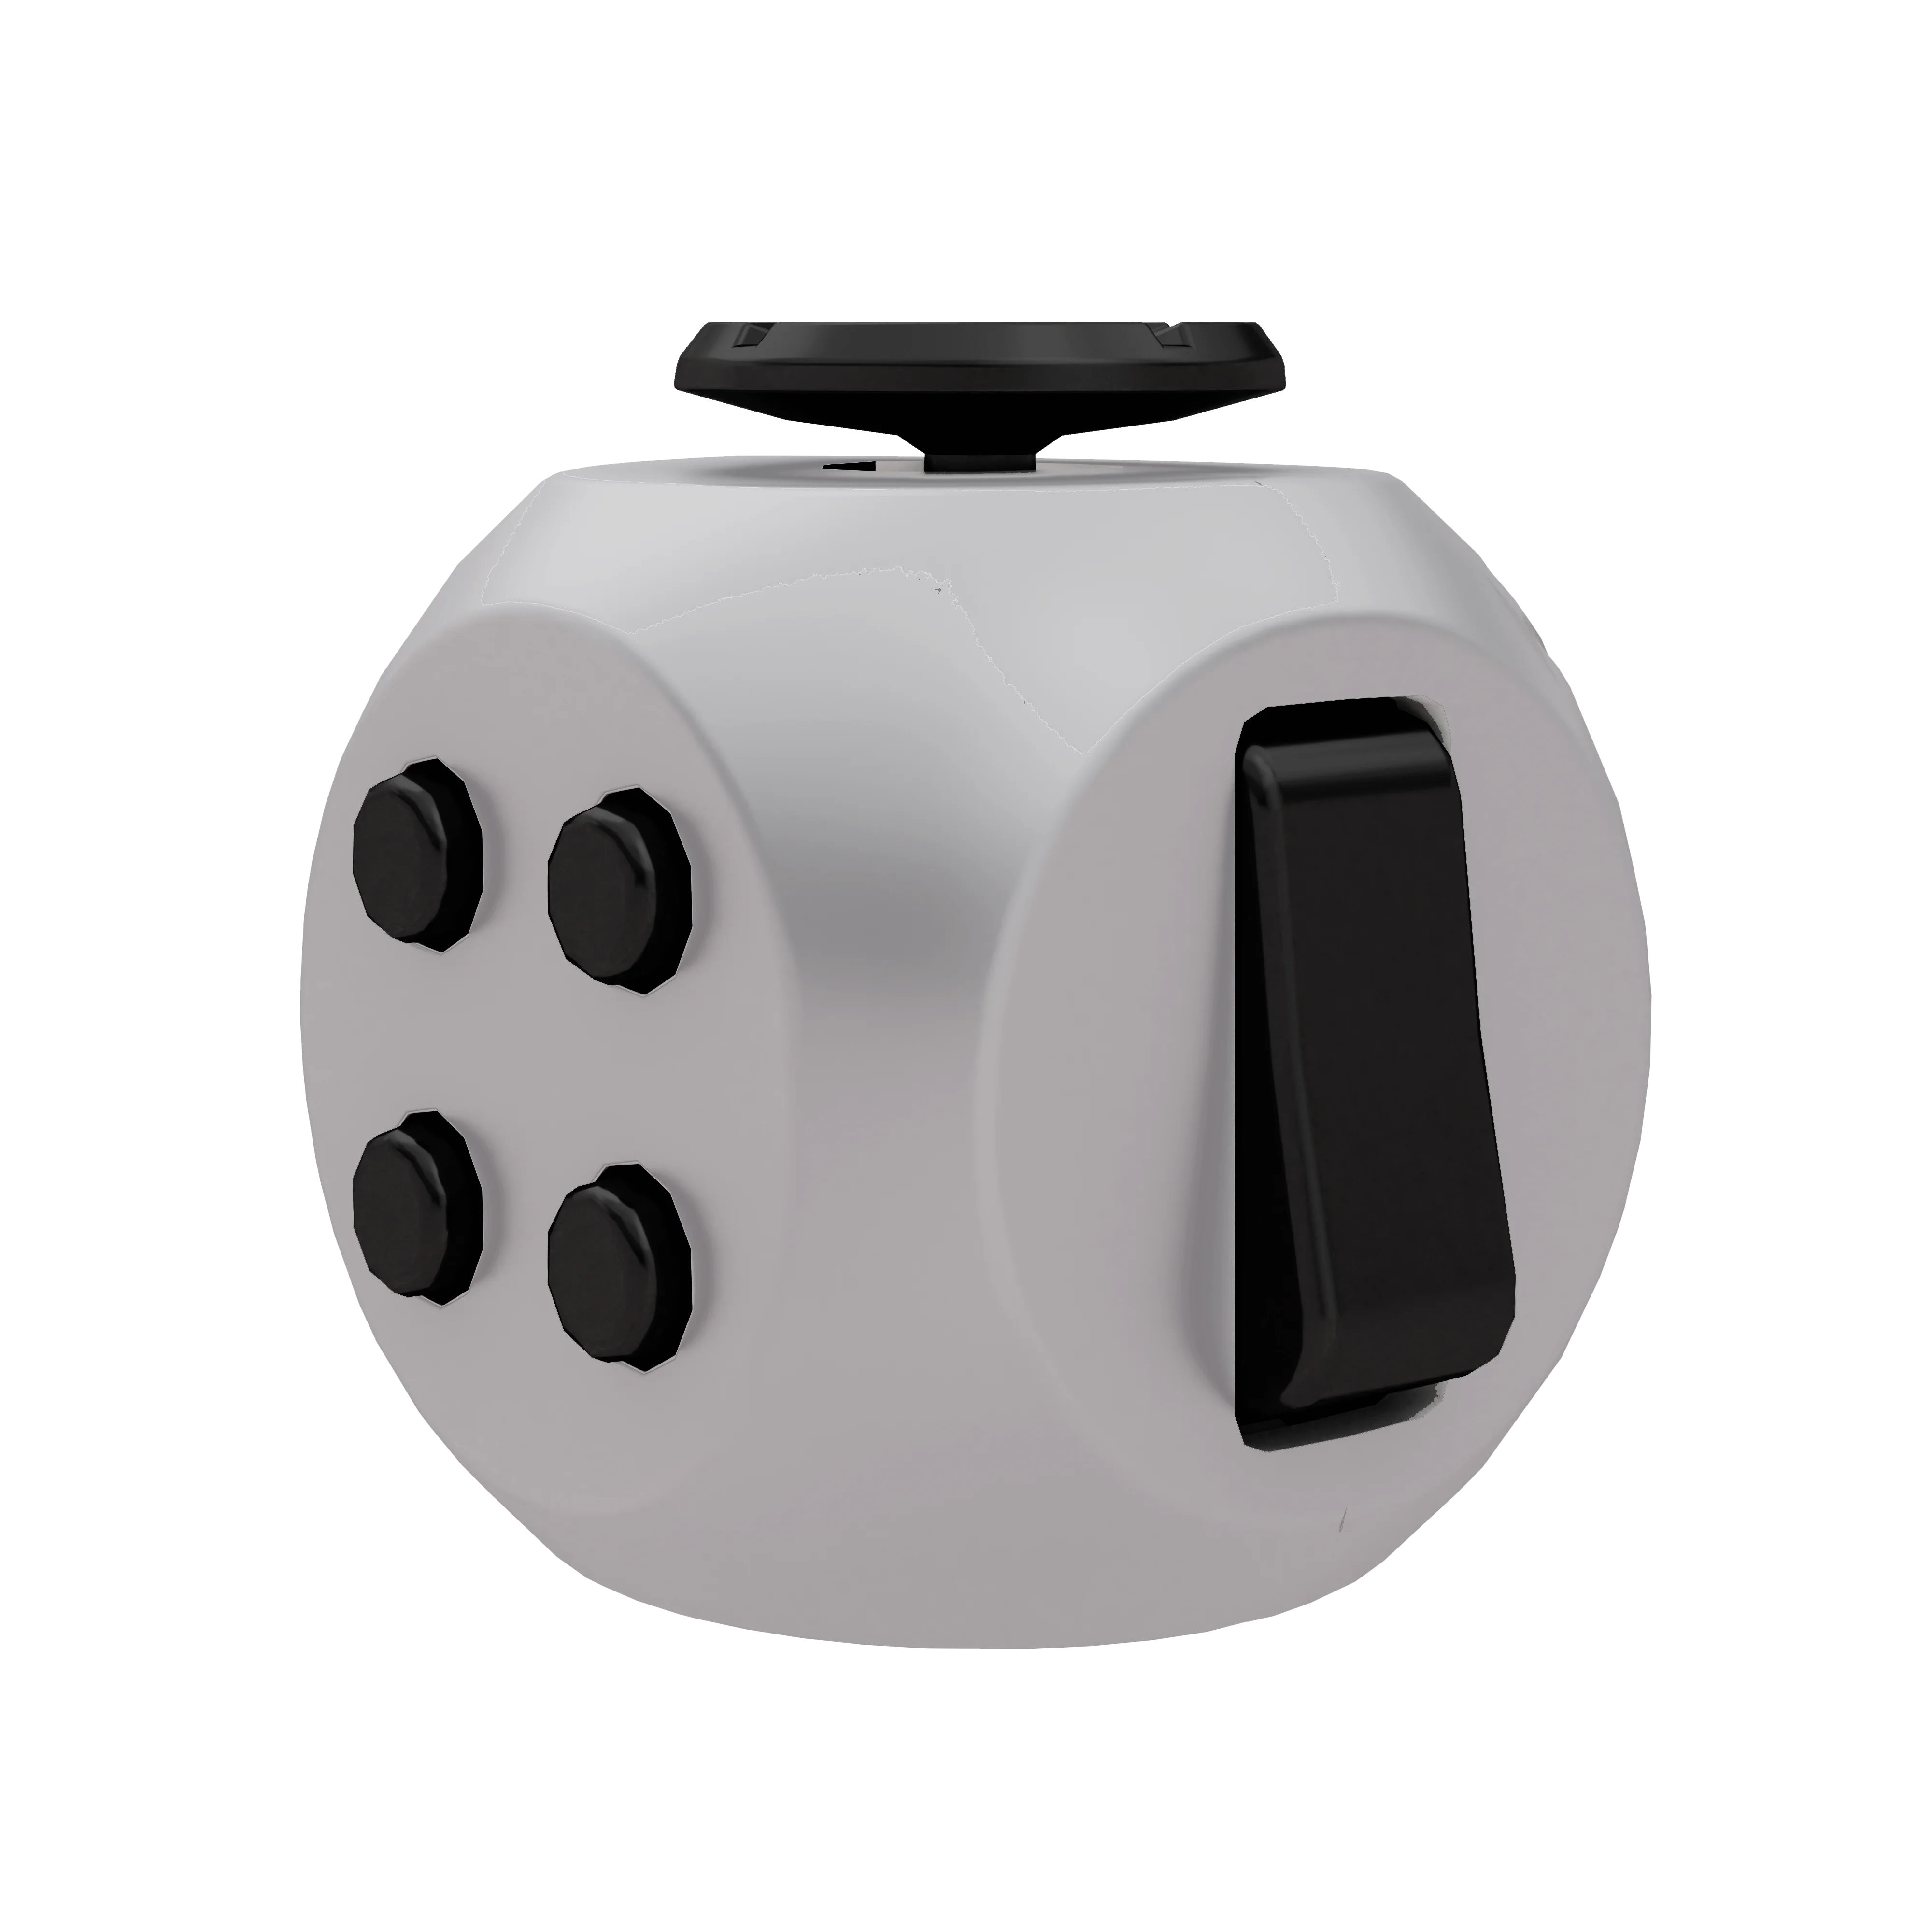 Fidget Cube Stress Relief Toy for Kids and Adults